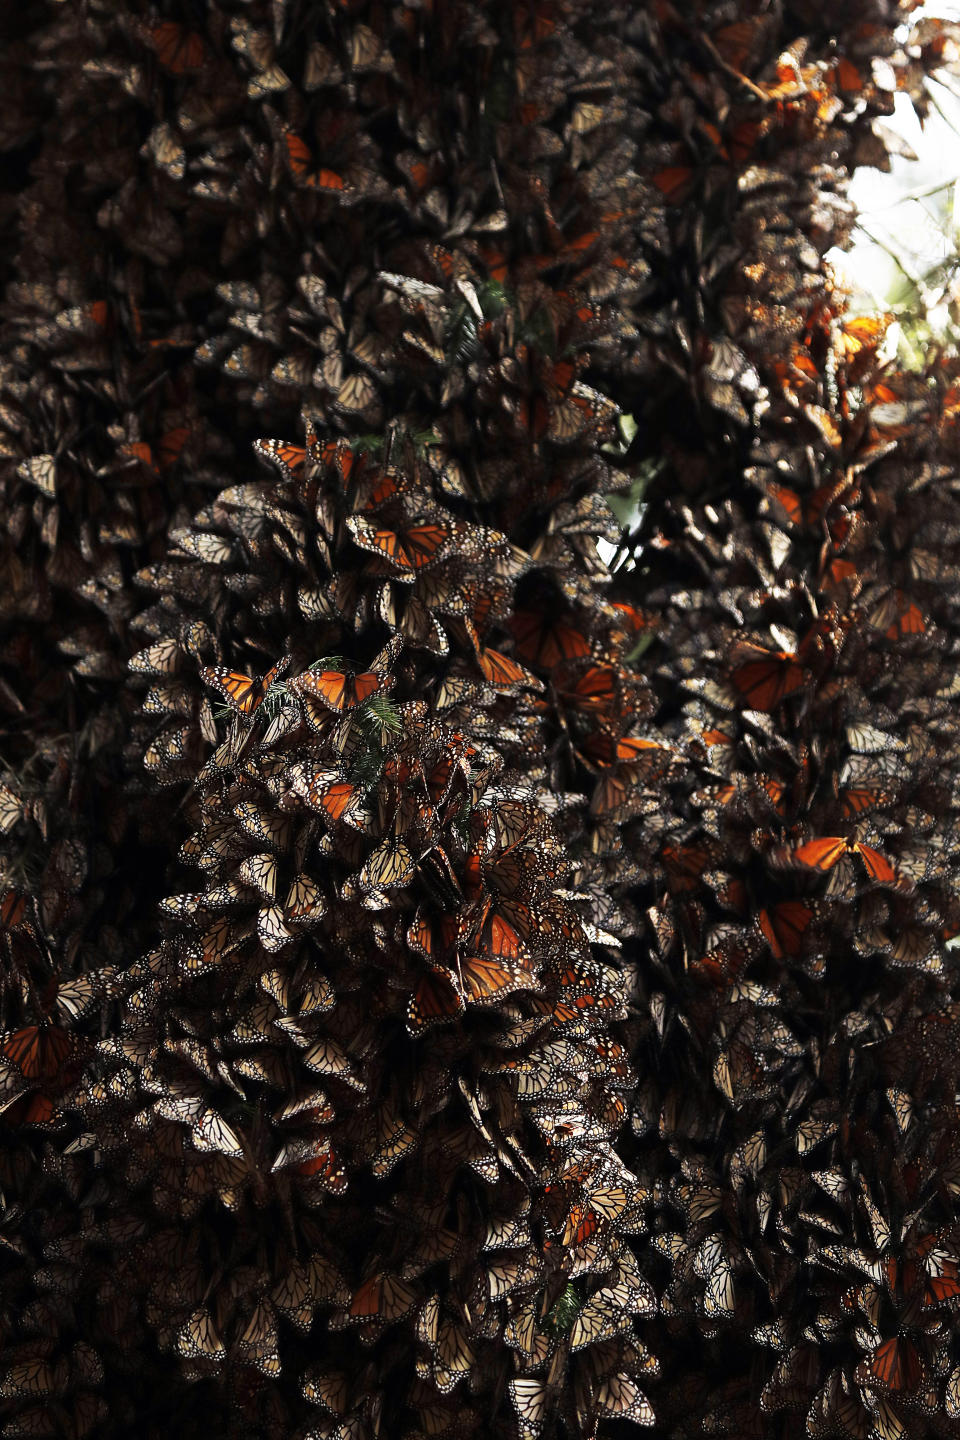 Monarch butterflies cluster in the Amanalco de Becerra sanctuary, on the mountains near the extinct Nevado de Toluca volcano, in Mexico, Thursday, Feb. 14, 2019. In towering firs above and below the butterflies hung in massive clumps on sagging boughs. Their brilliant orange and black colors were hidden by the pale underside of their closed wings as they clung to each other in the clusters. (AP Photo/ Marco Ugarte)